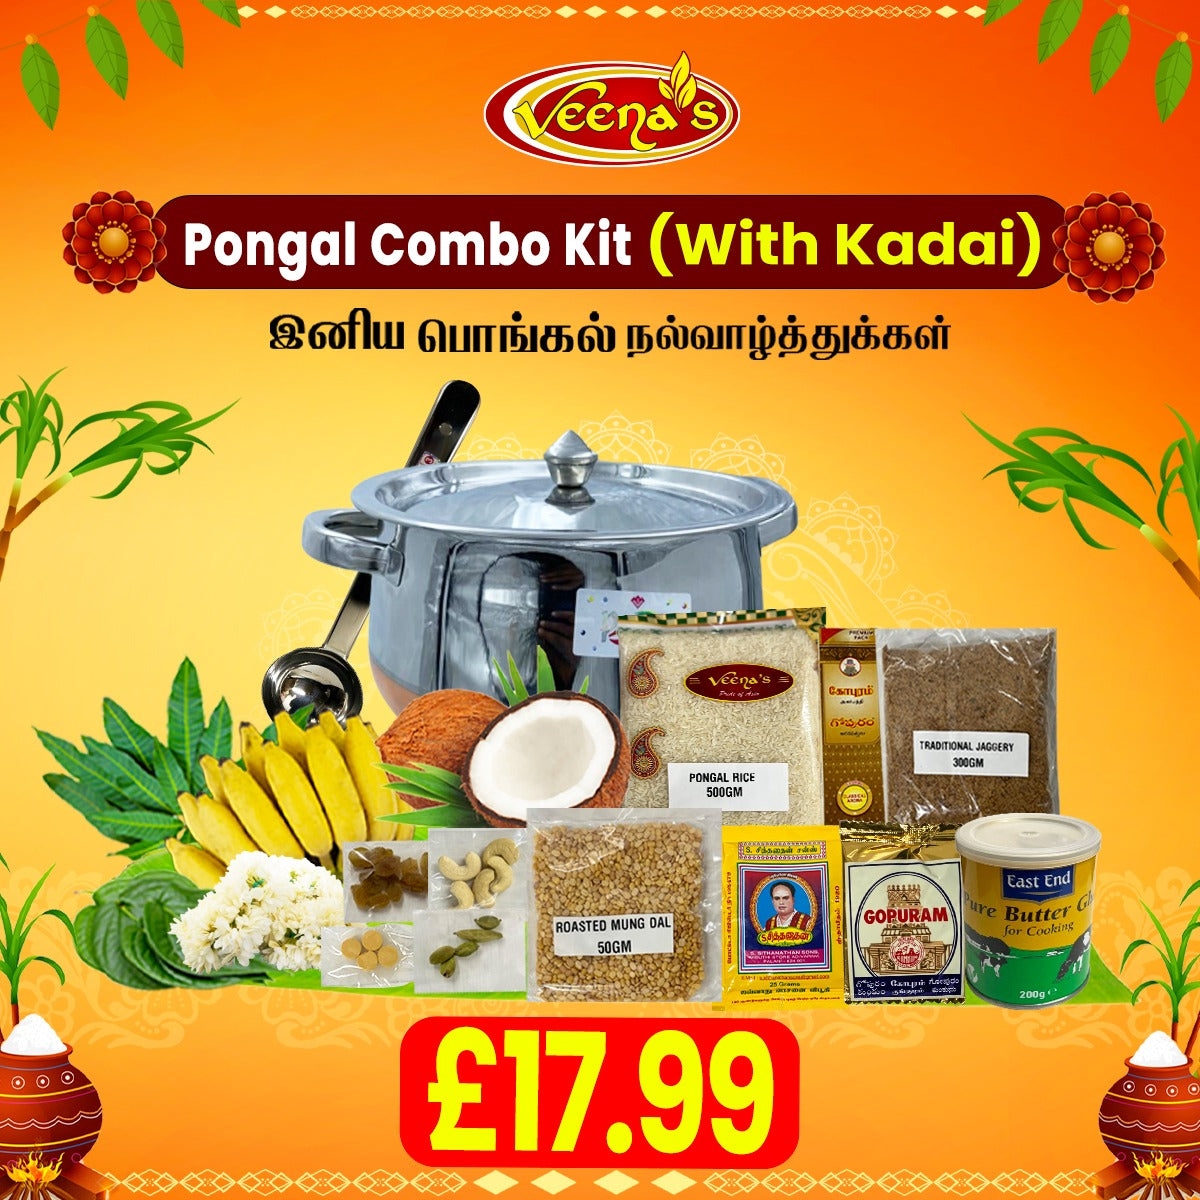 Veena's Special Pongal Combo Kit White Raw Rice